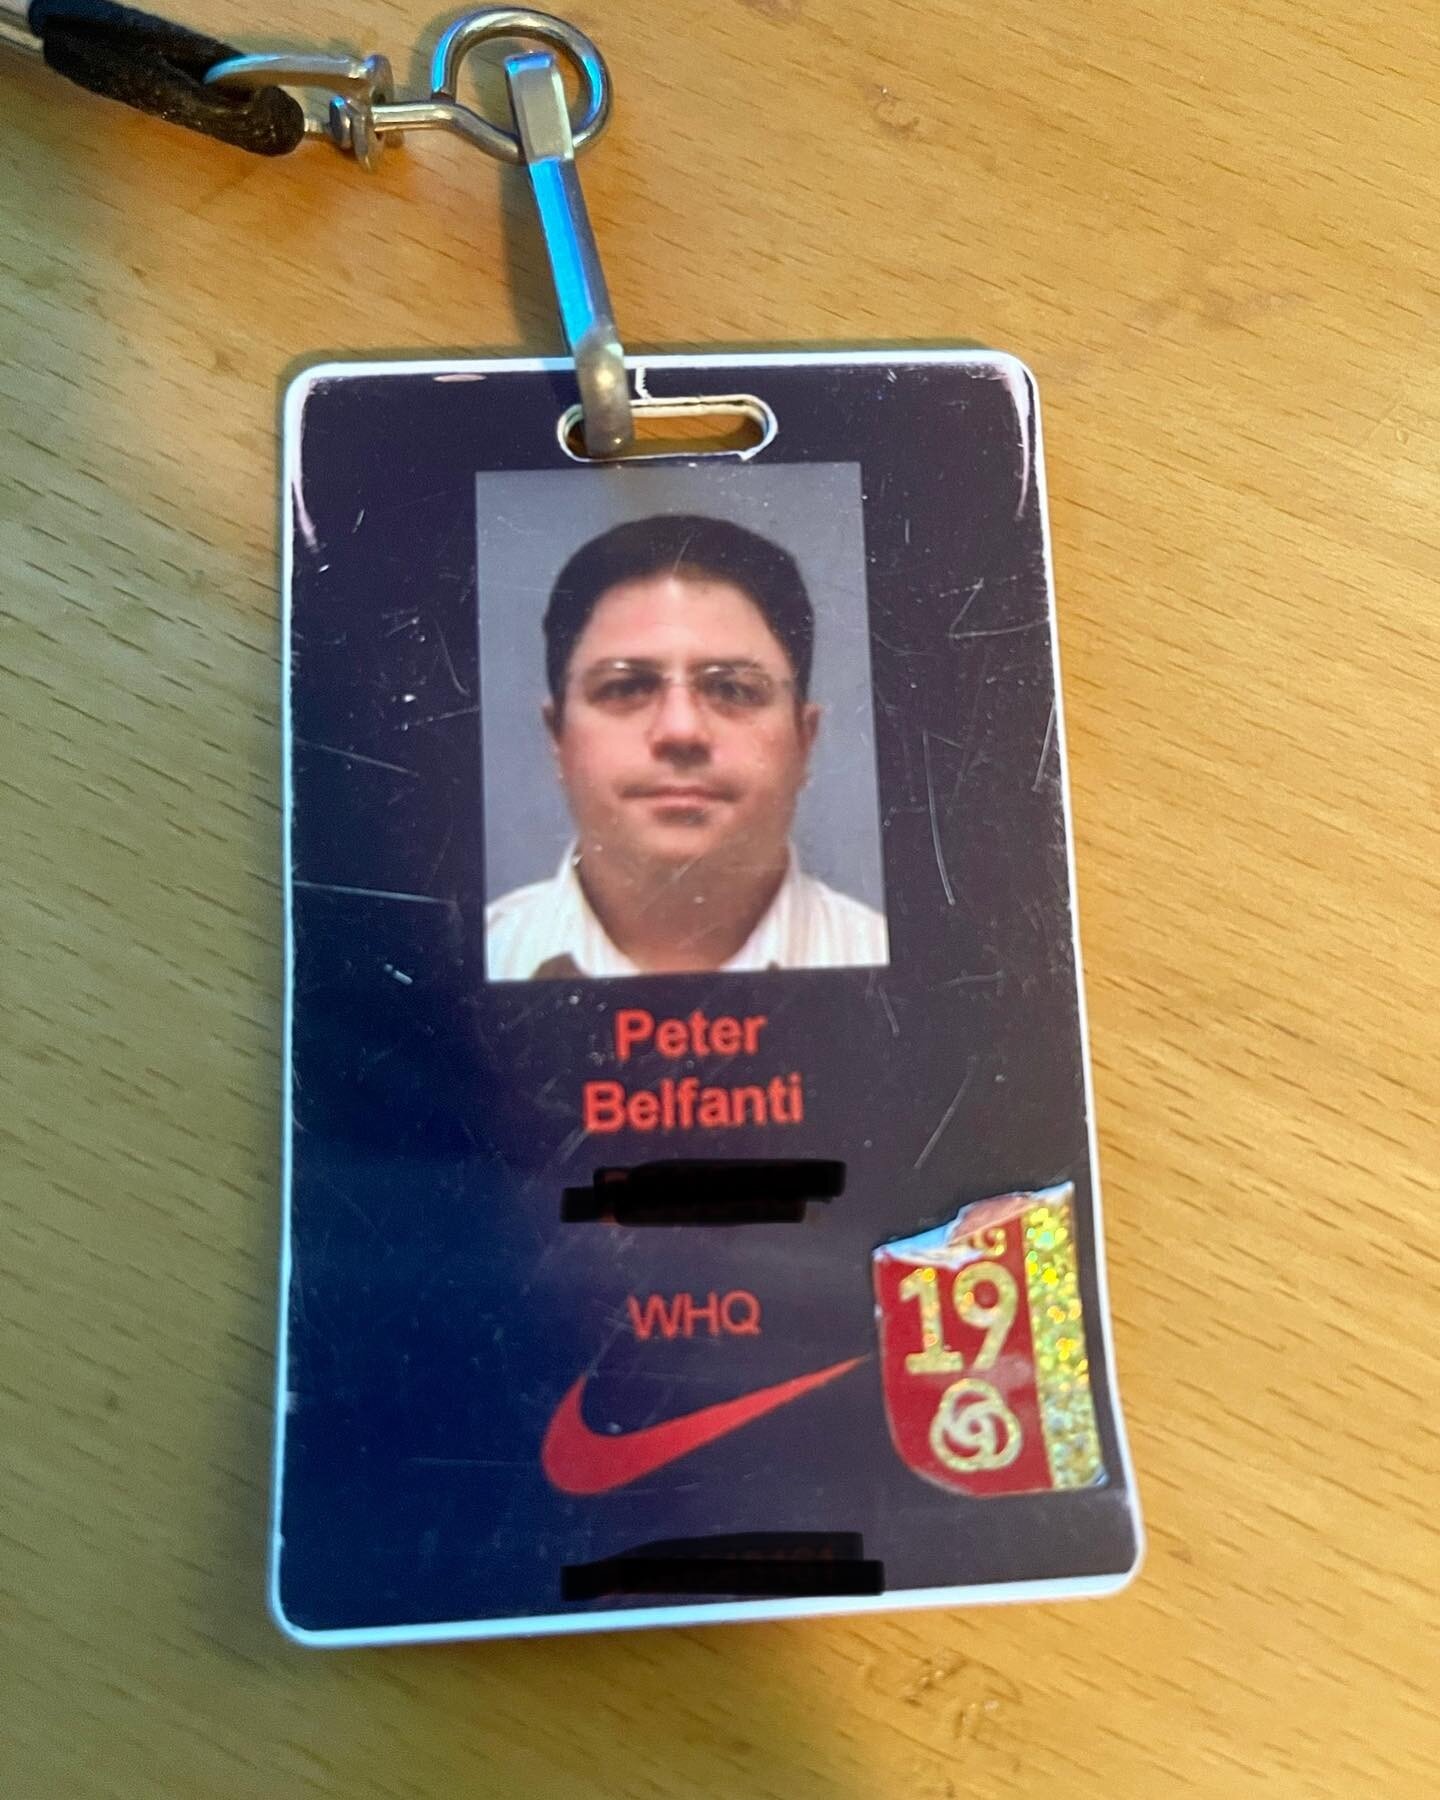 It&rsquo;s official&hellip; I have retired from Nike to run Belfanti machine works full time!! Thank you to all the people who inspired me and contributed @dyno217 #instamachinist #fusion360 #fusion360cam #haasautomation @saundersmachineworks @johngr